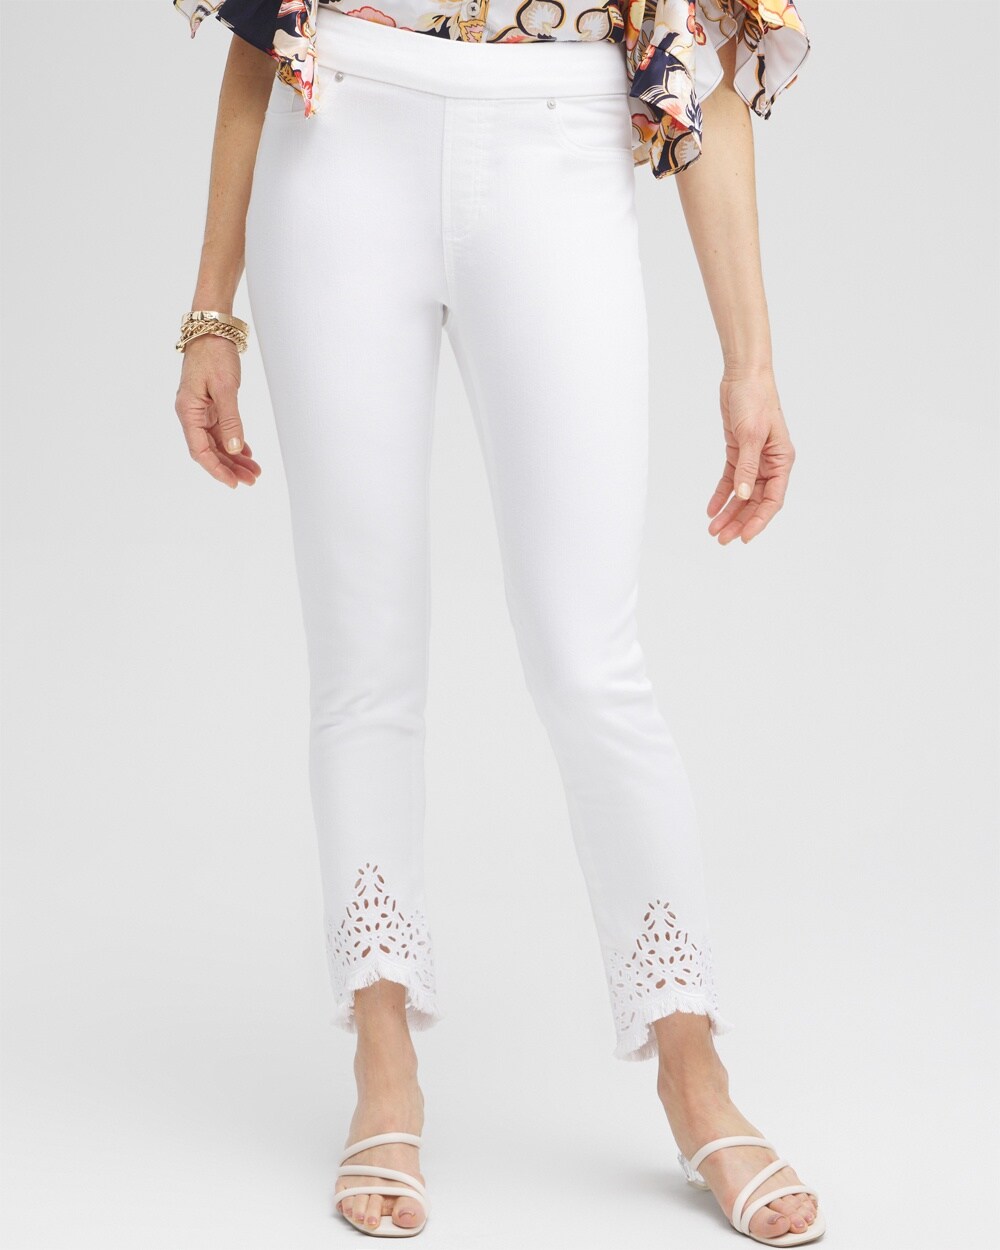 Chico's Eyelet Tulip Hem Pull-on Ankle Jeggings In White Size 10p |